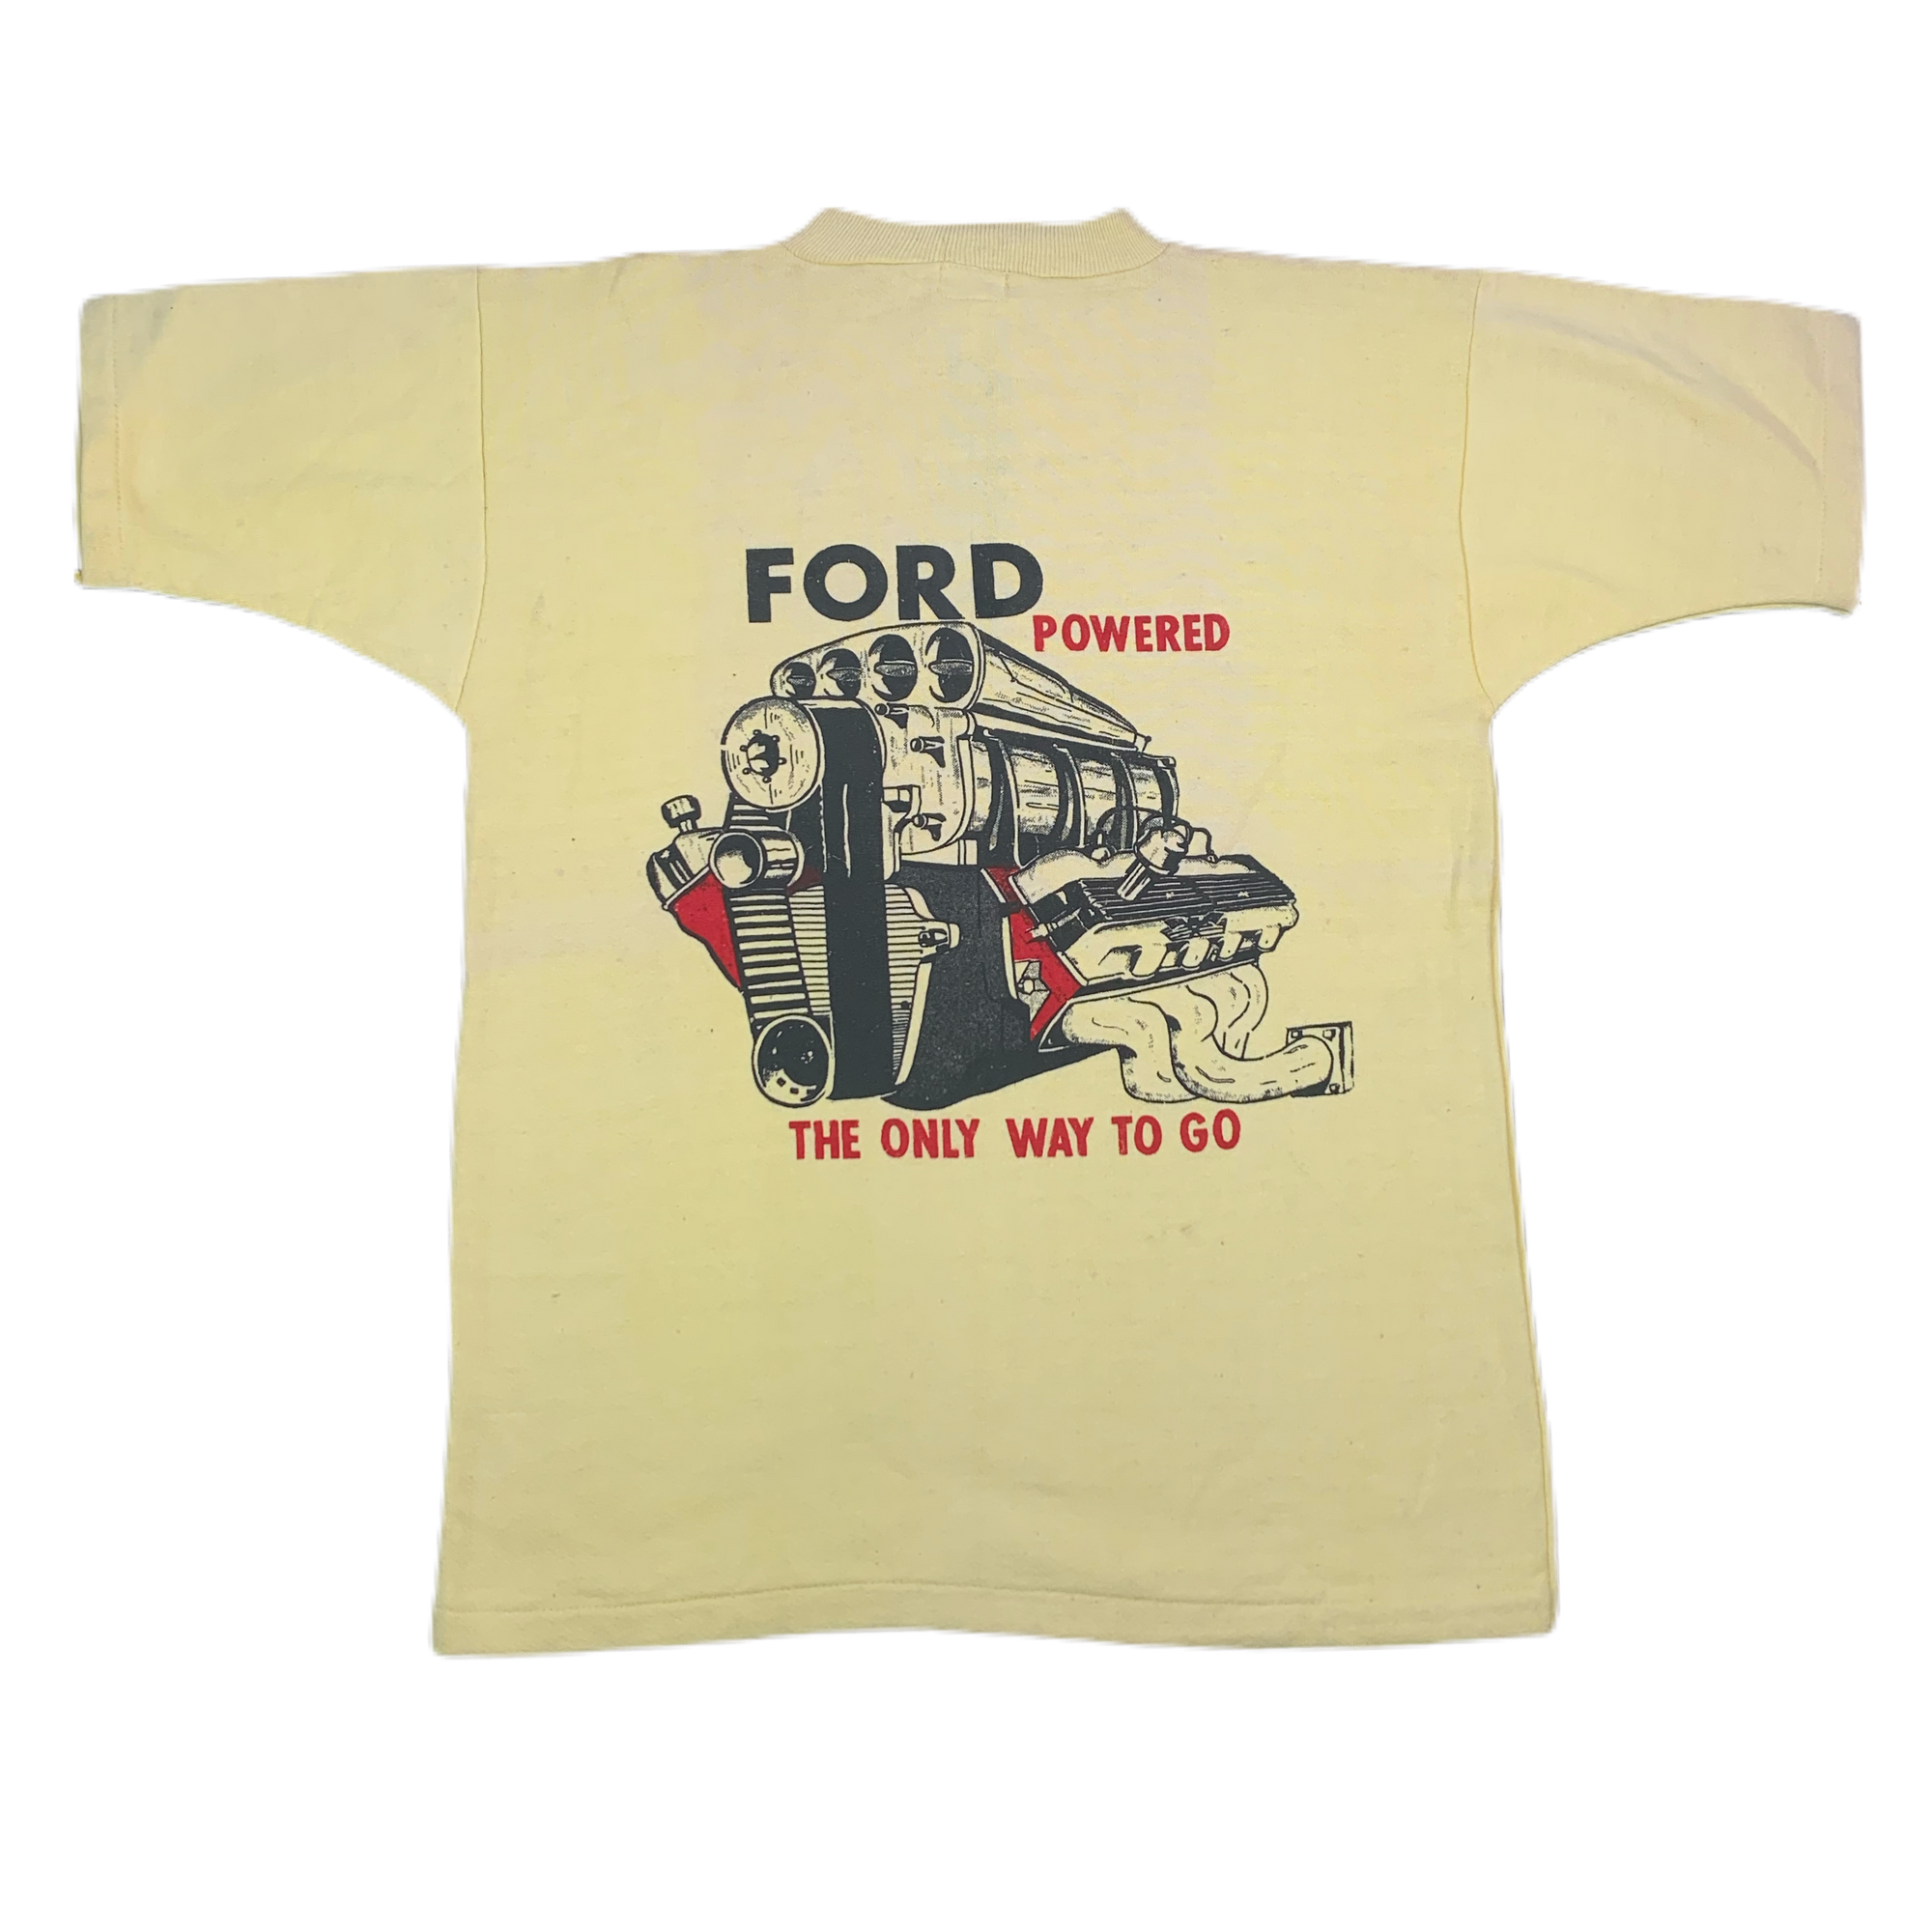 Vintage Ford Motor Company "Ford Powered" Lace Up Collar Shirt - jointcustodydc